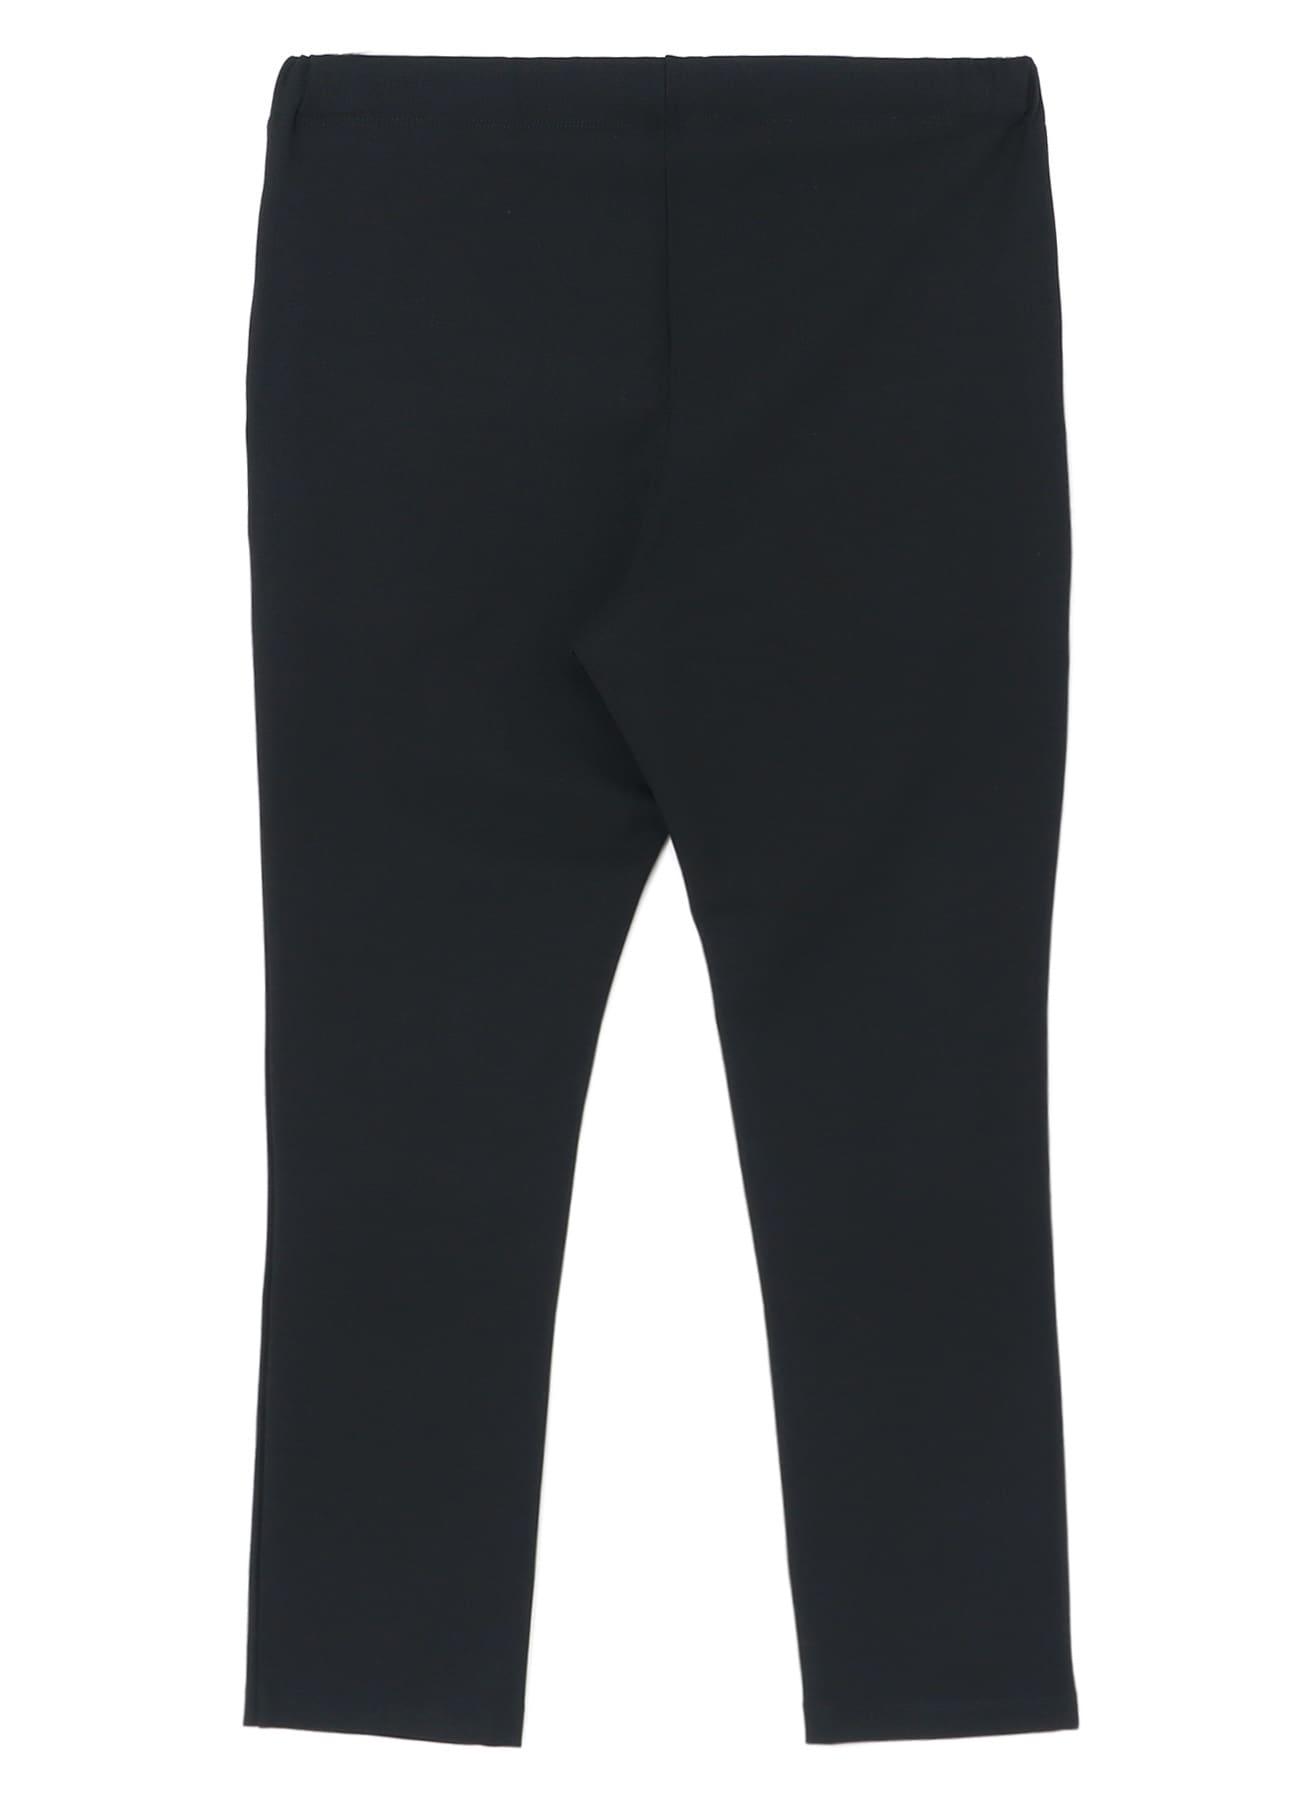 2WAY STRETCH SLIM PANTS(FREE SIZE Black): Y's for living｜THE SHOP